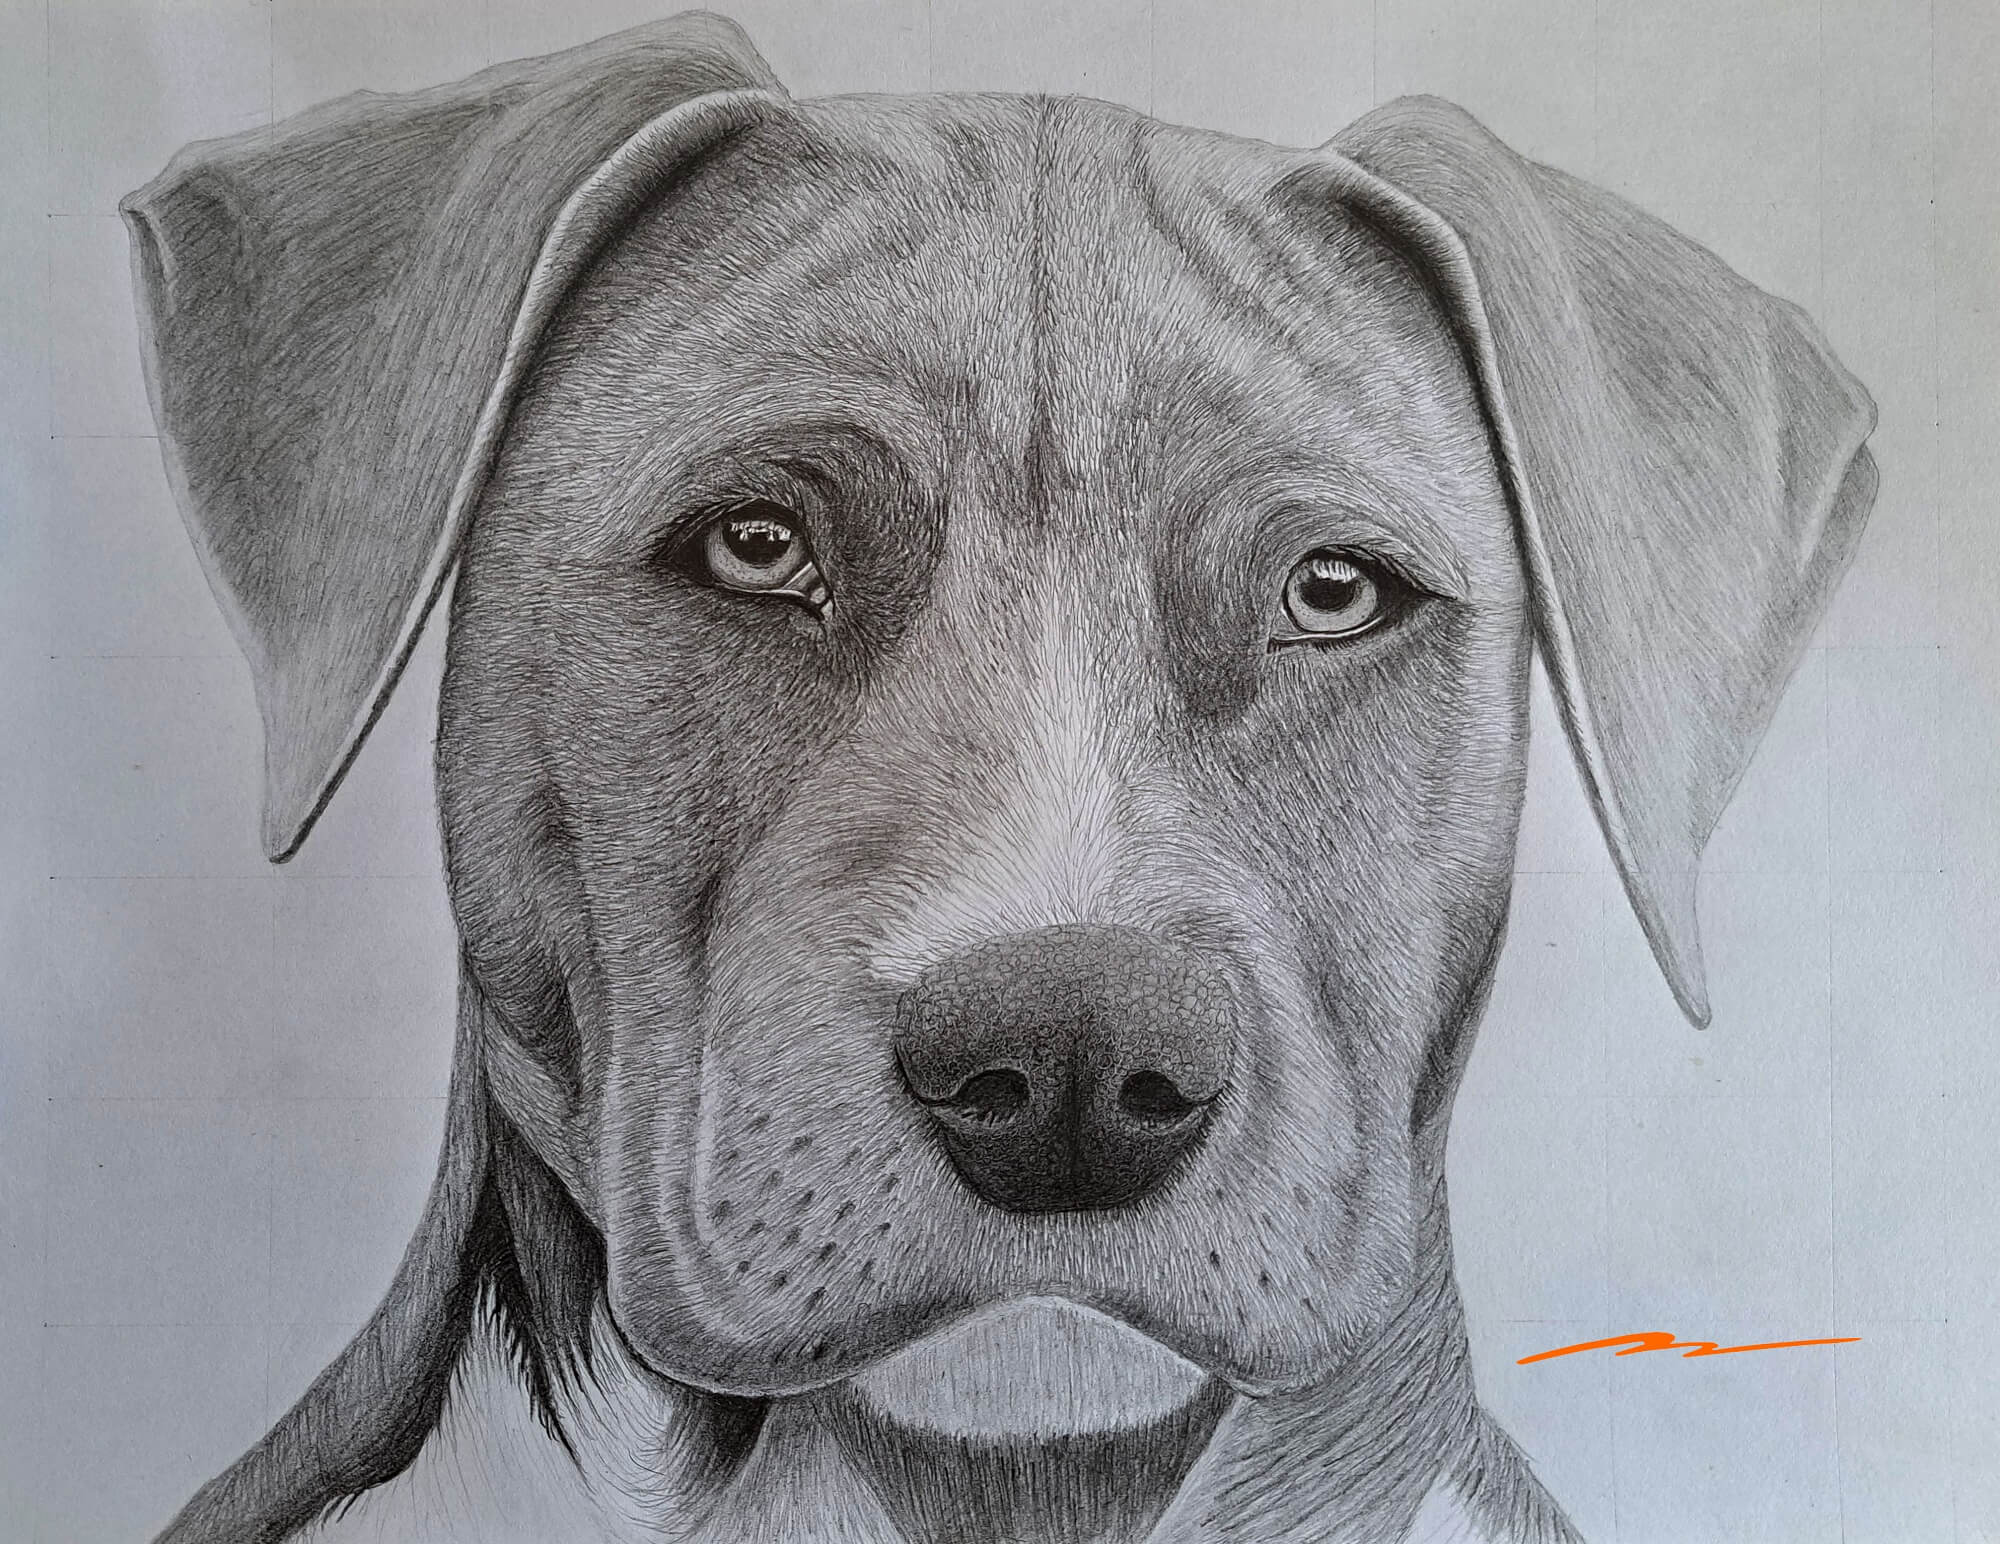 Hyper-Realistic Animal Pencil Drawings By Helen Violet » Design You Trust